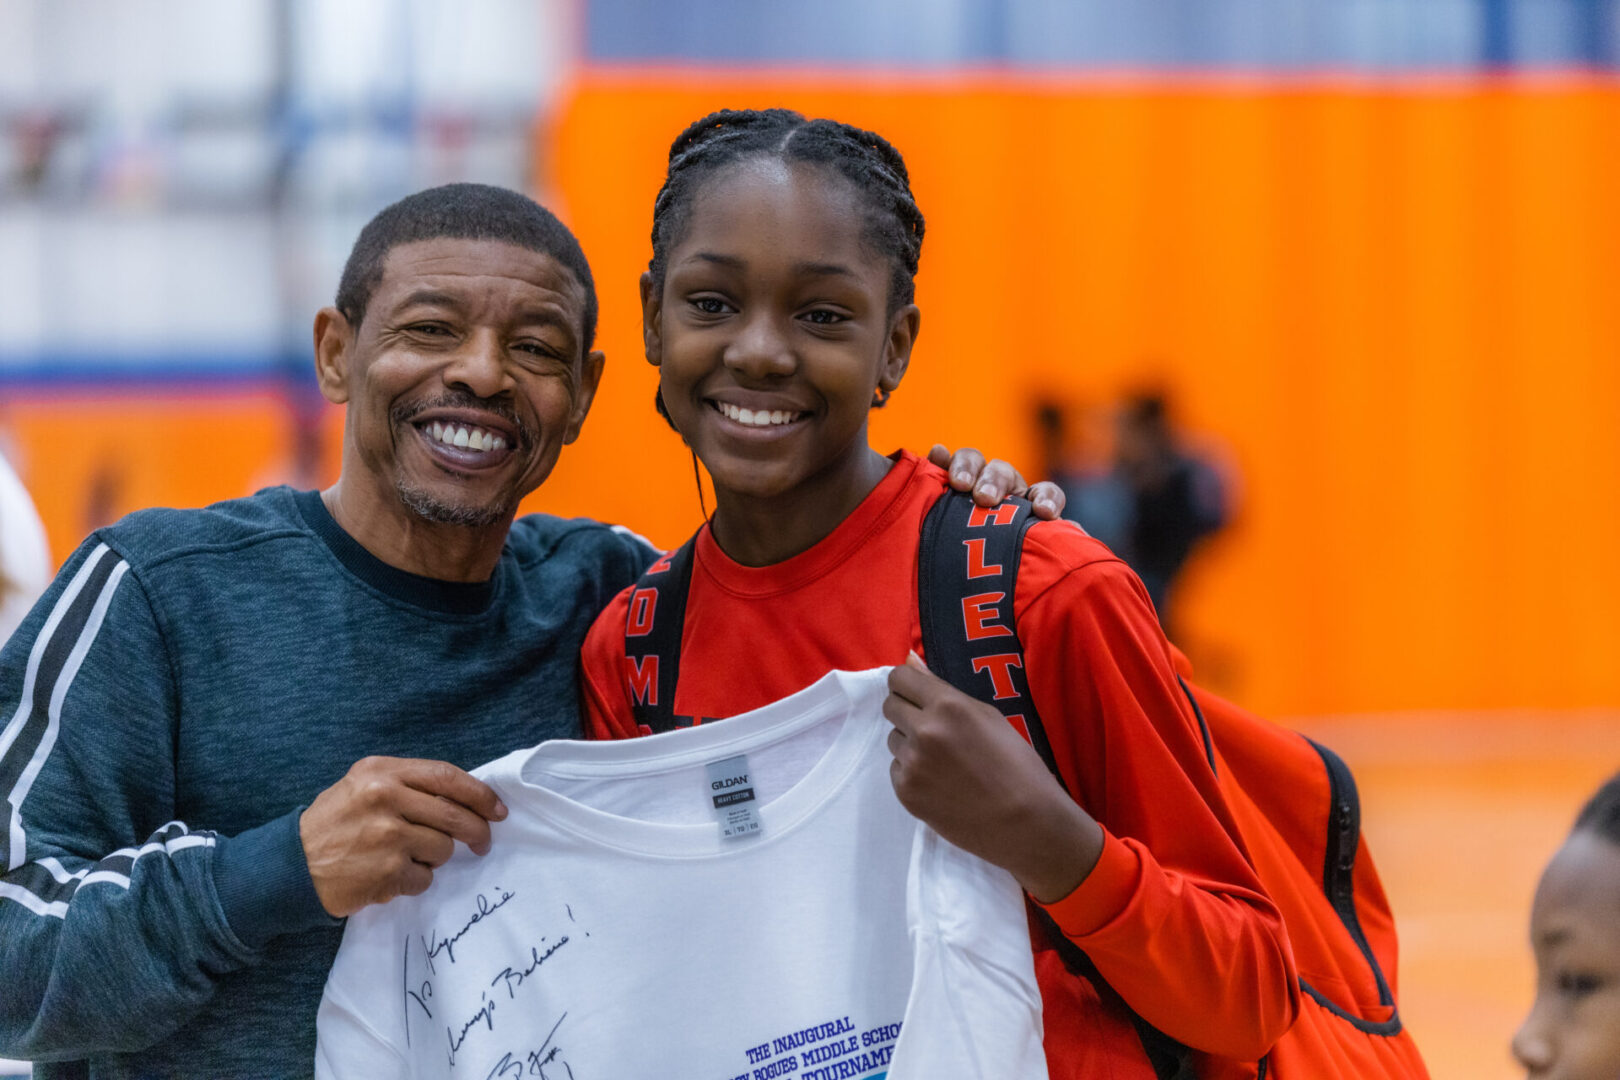 Muggsy autographs tee shirt for player in the 2023 Muggsy Bogues Middle School Basketball Tournament, a signature fundraising event of the MBFF 